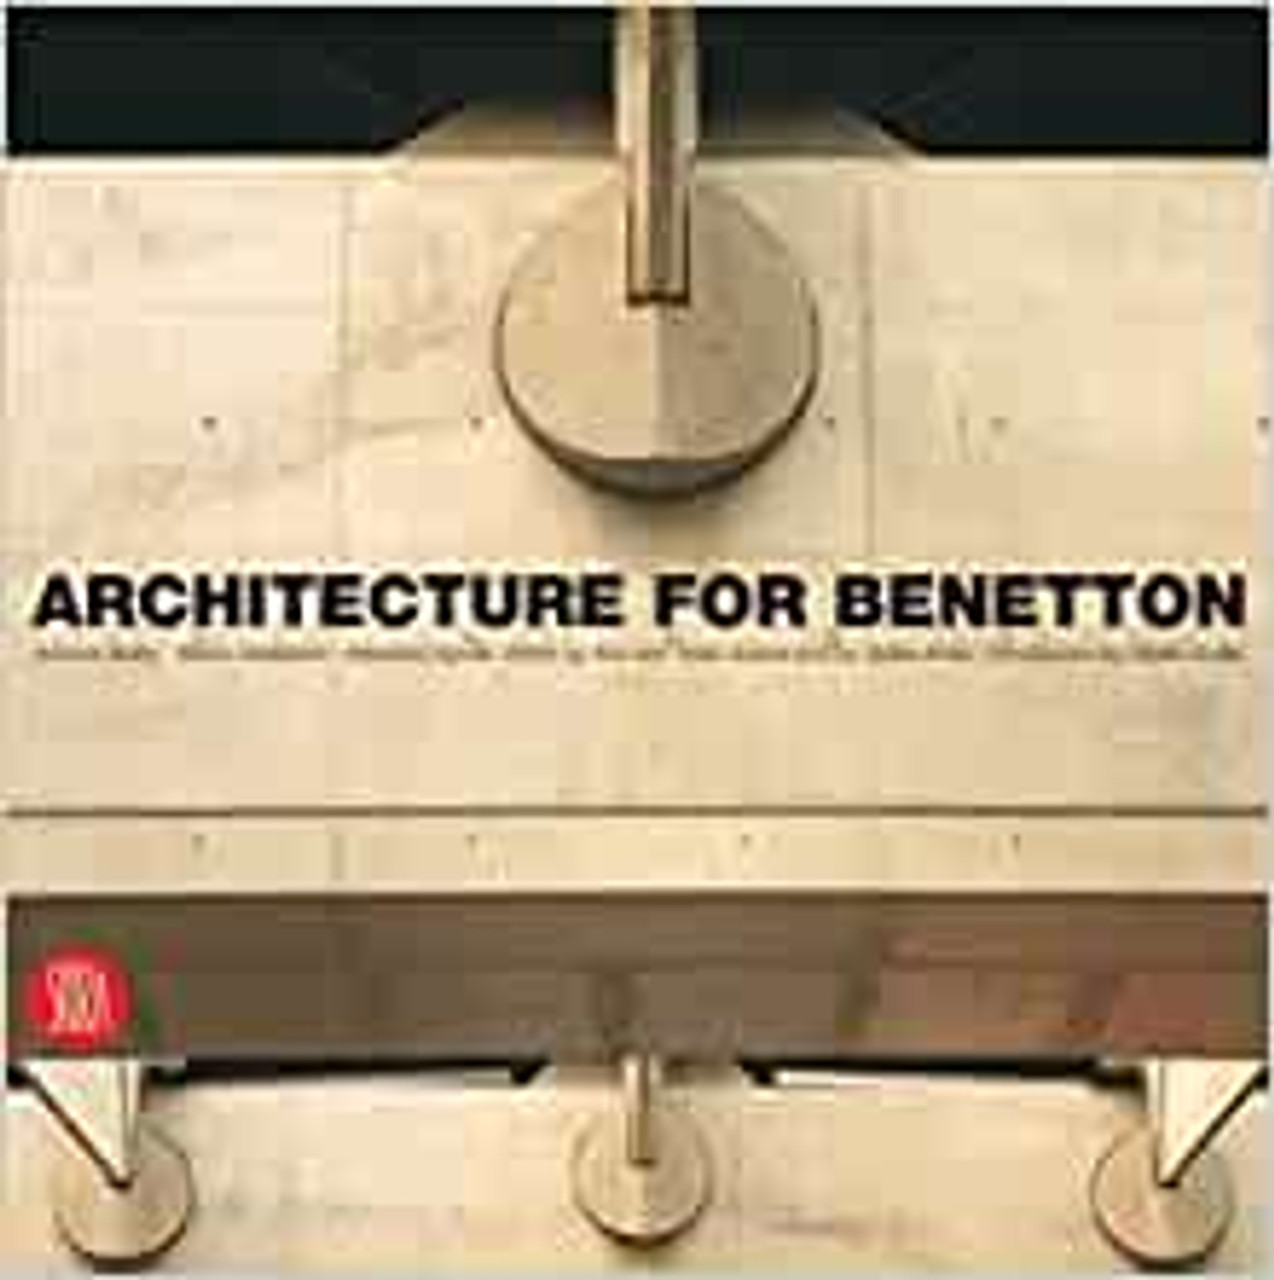 Mulazanni, Marco & Mulas, Antonia, Architecture for Benetton - HB ( Works by Afra and Tobia Scarpa )  2004